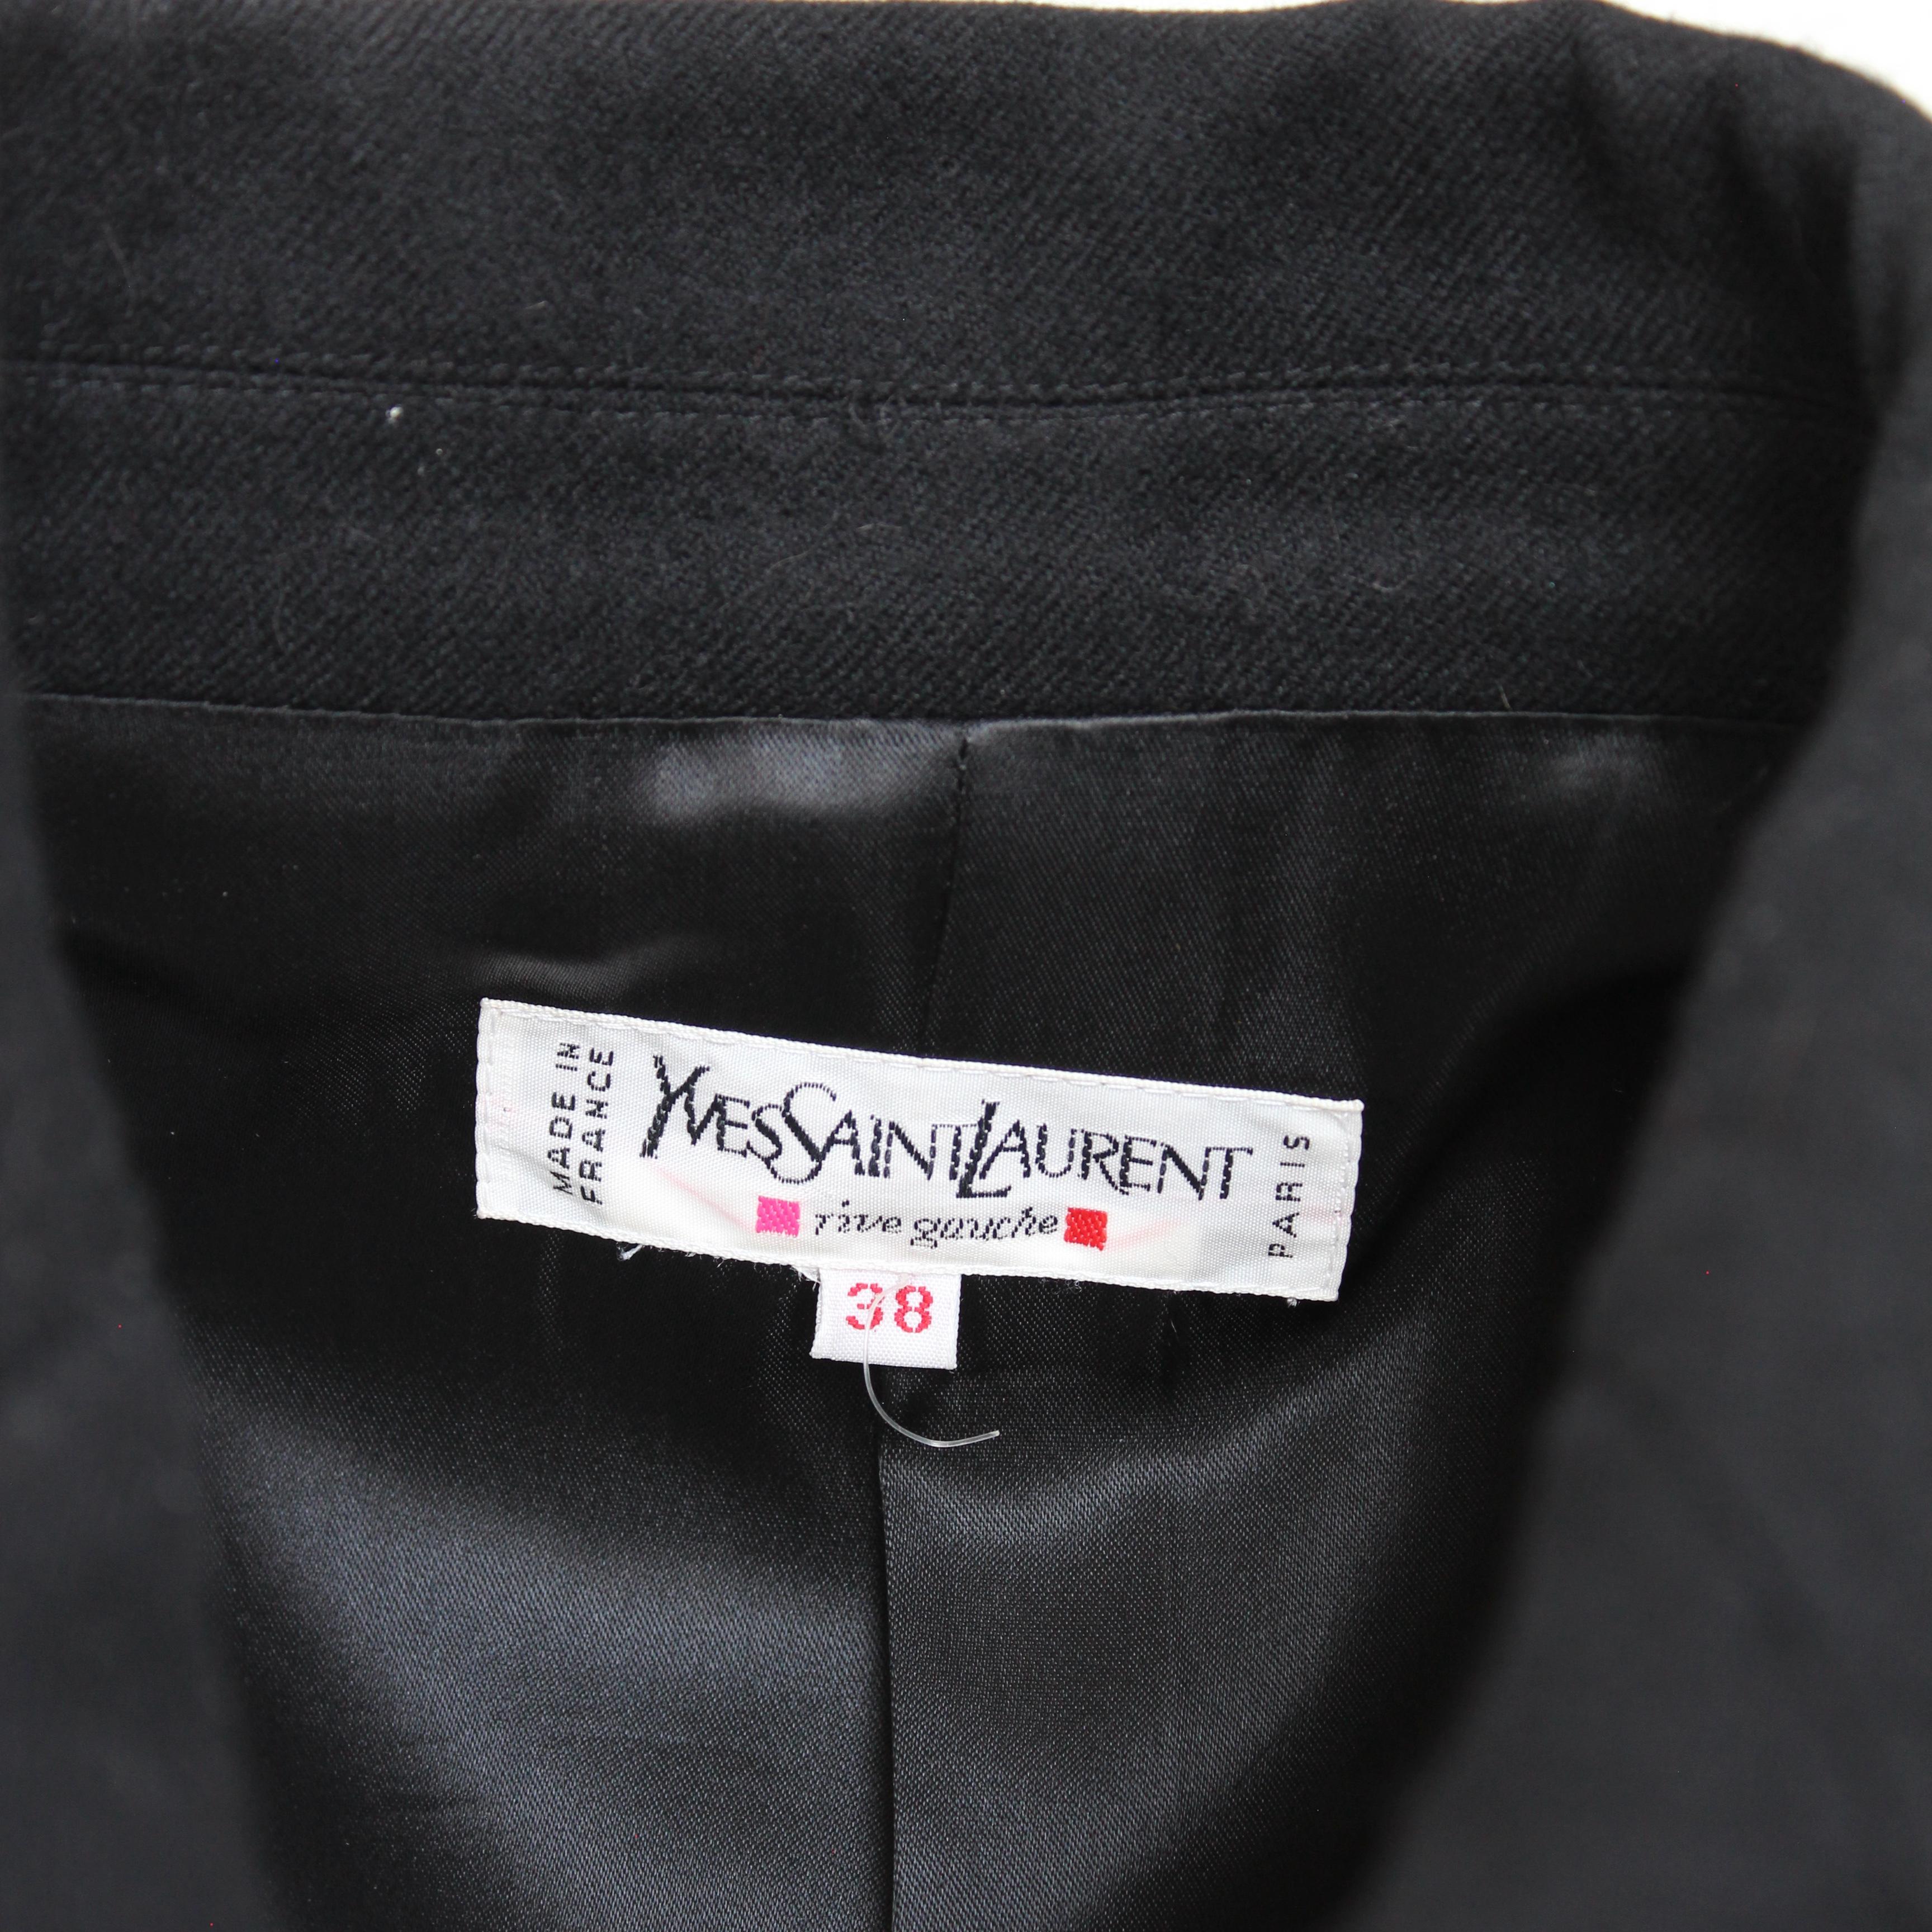 Yves Saint Laurent Jacket Black Wool Double Breasted Pea Coat Style Vintage 90s For Sale 5